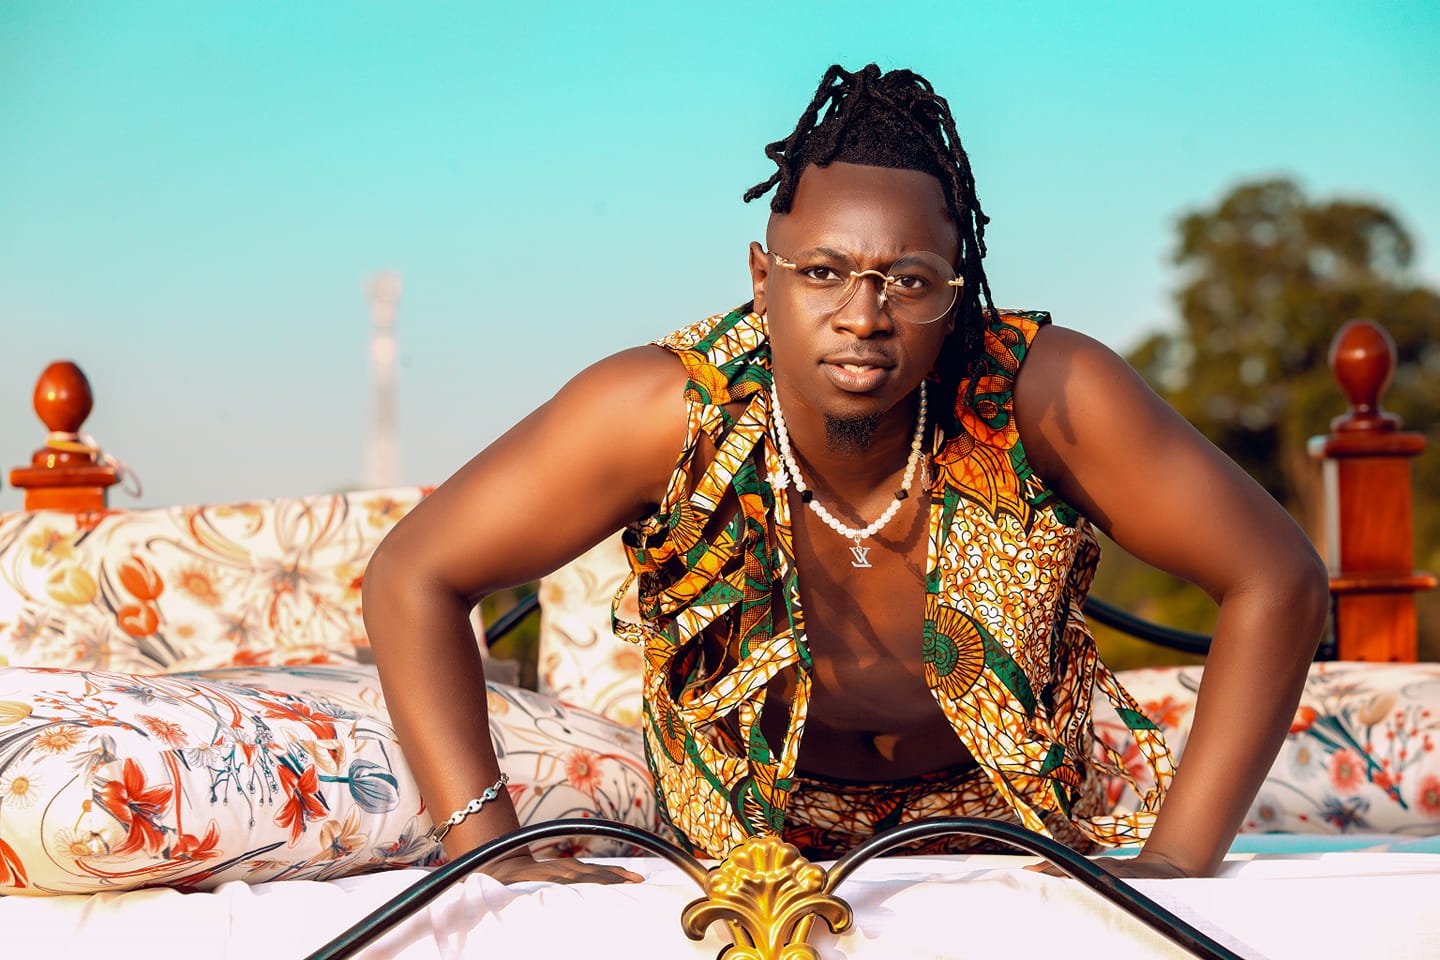 vyper-ranking-announces-plans-for-debut-concert-to-prove-his-prominence-in-uganda’s-dancehall-industry